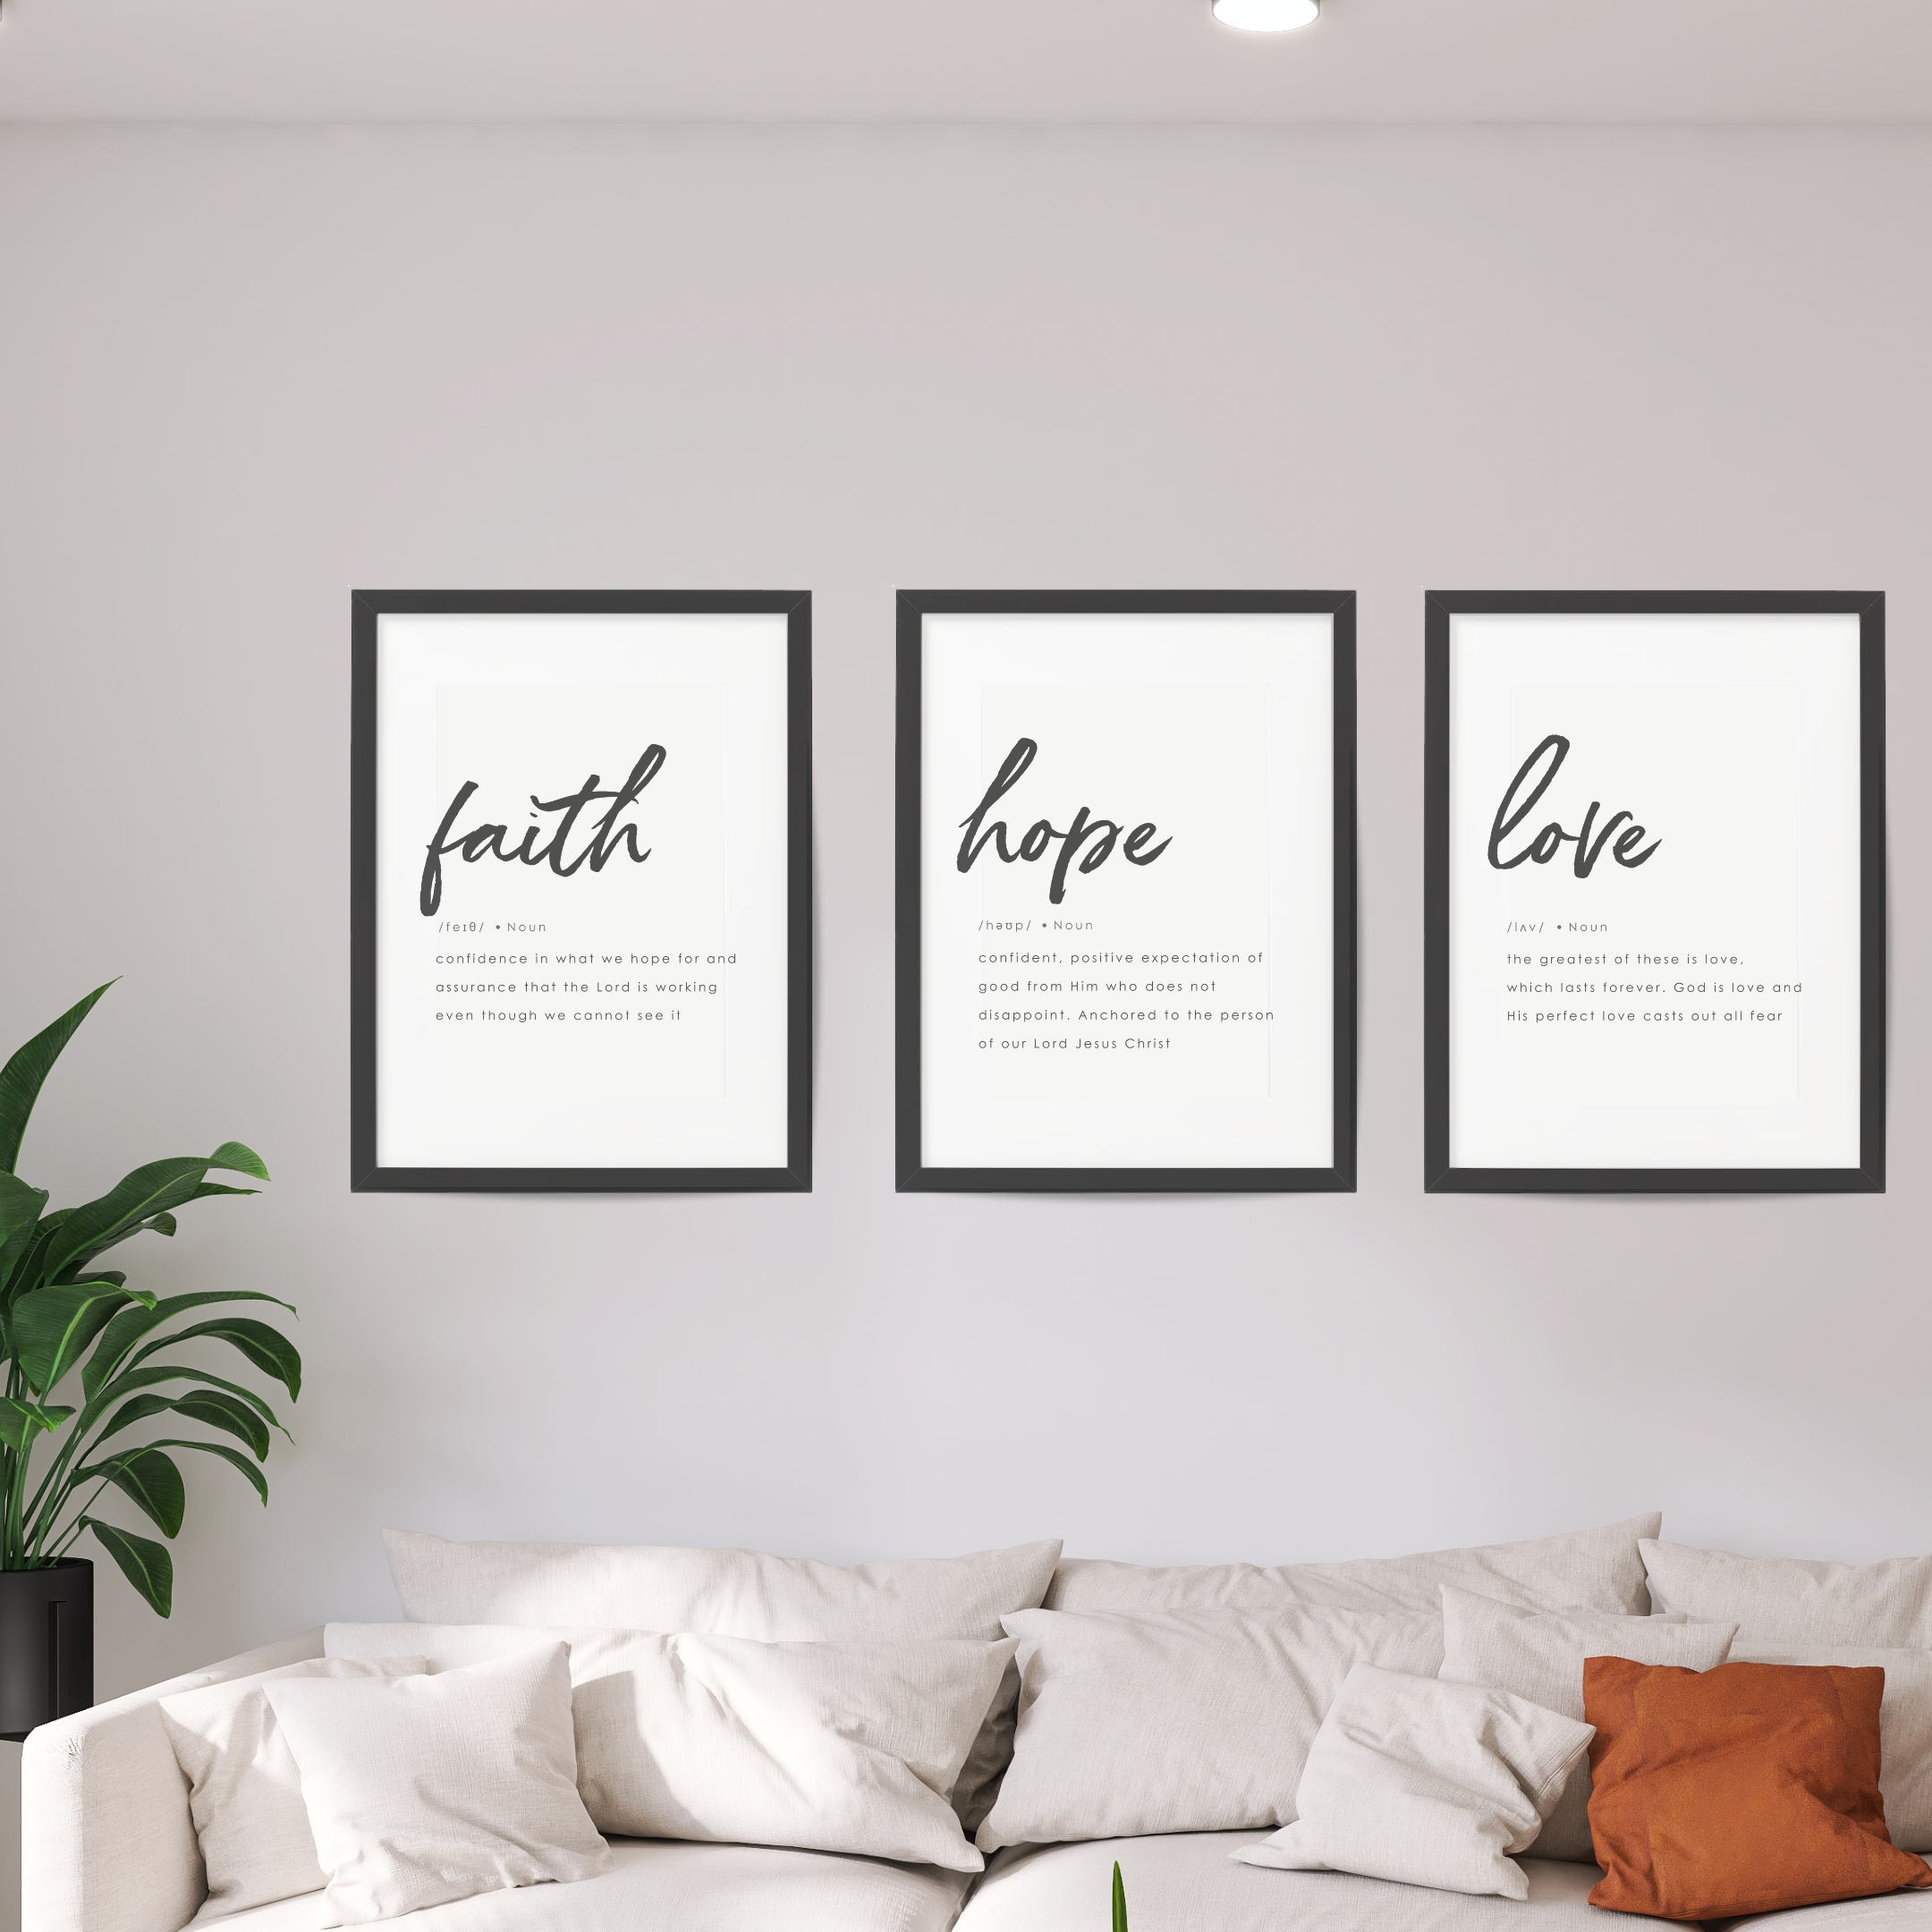 Love, A3 Print in Black Frame by His Fruitful Vine